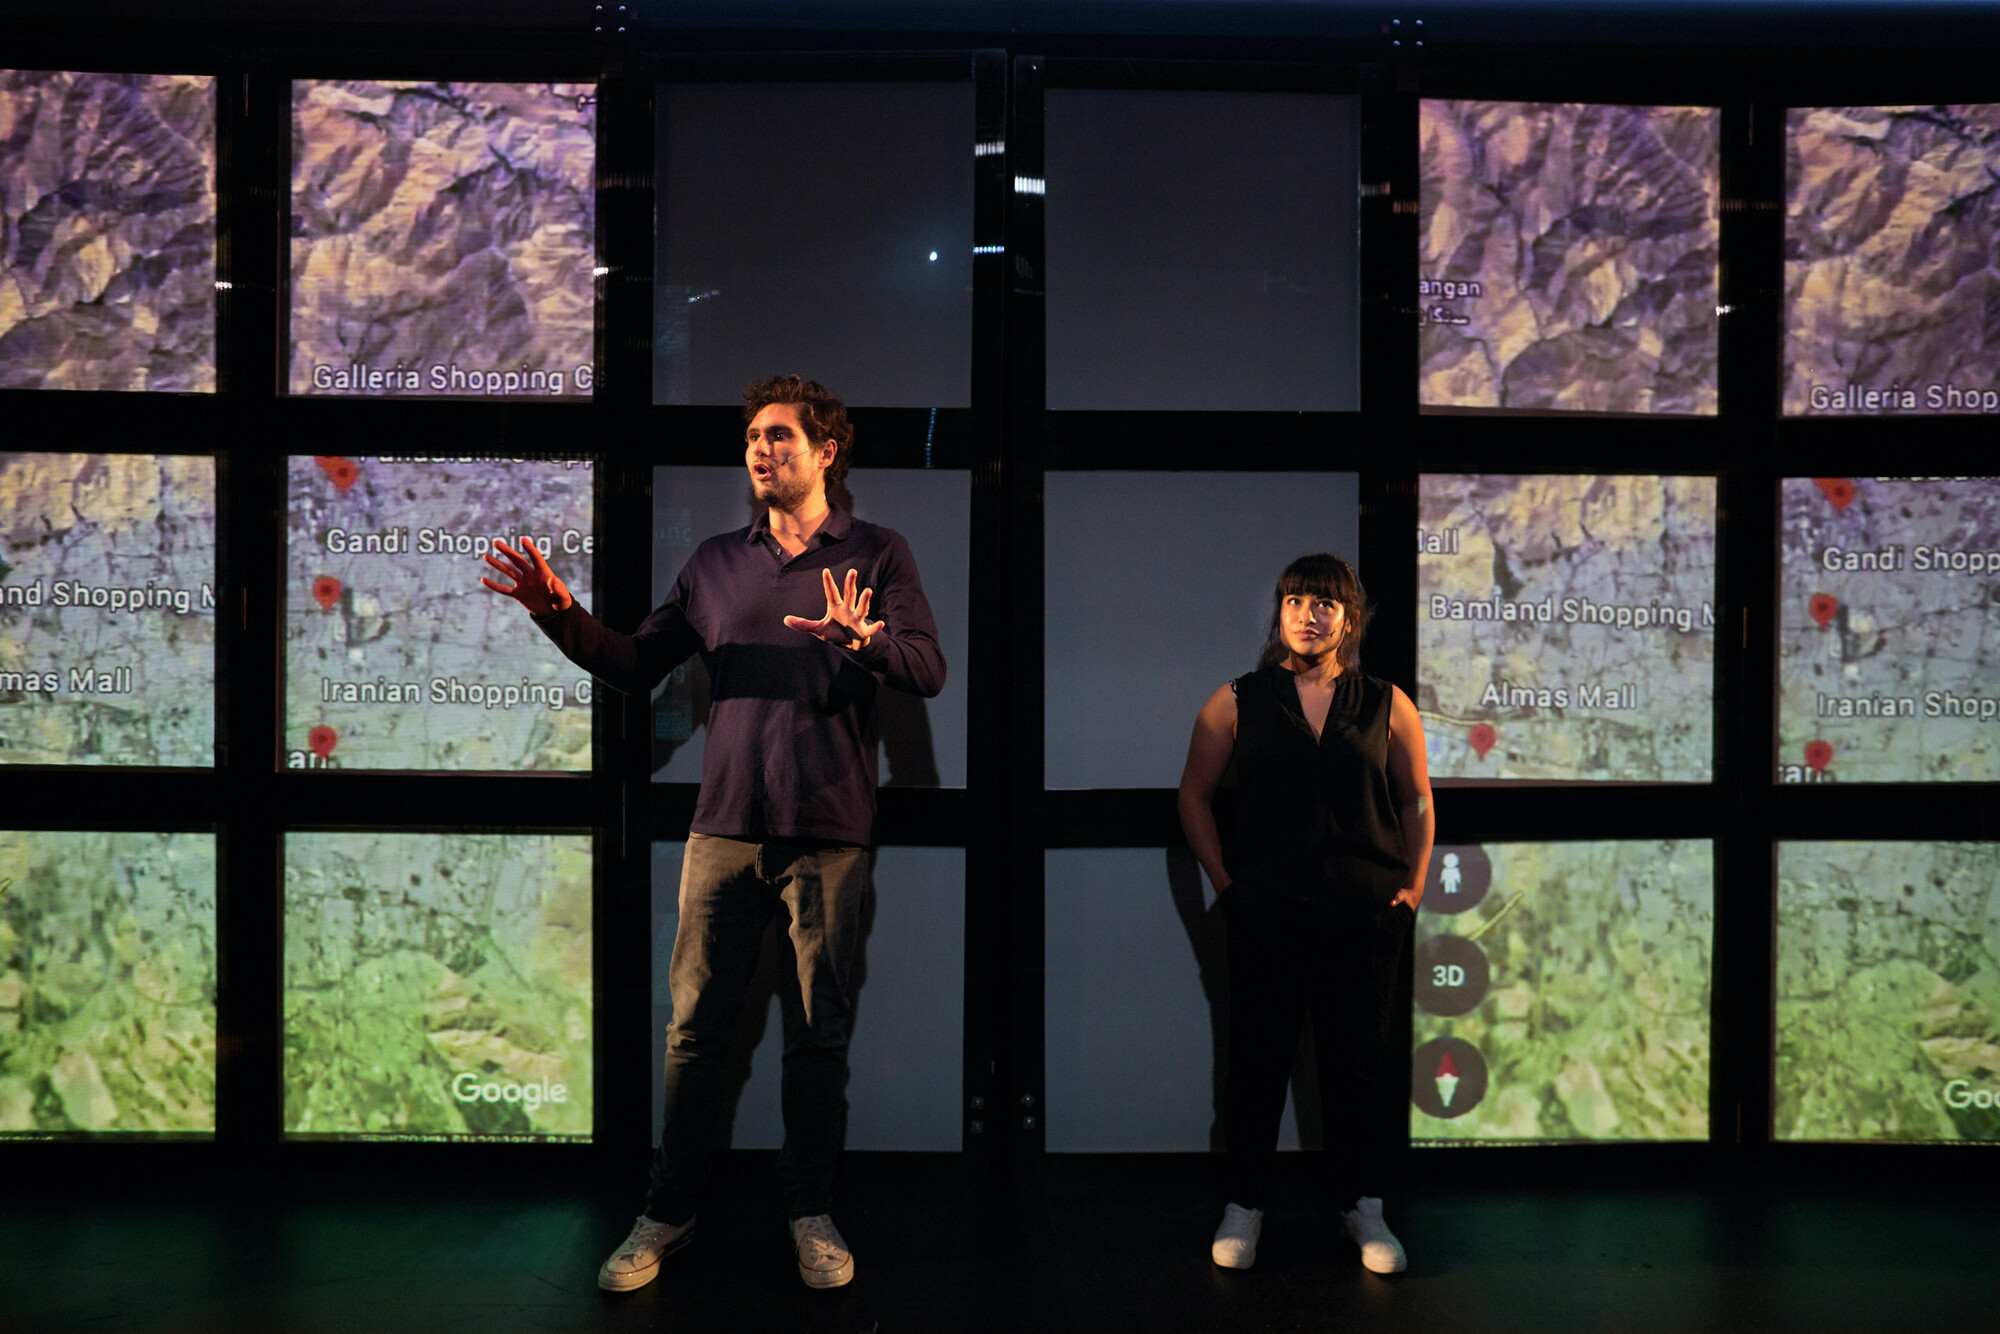 A man (left) and woman (right) standing in front of several screens, some with parts of a map on display.